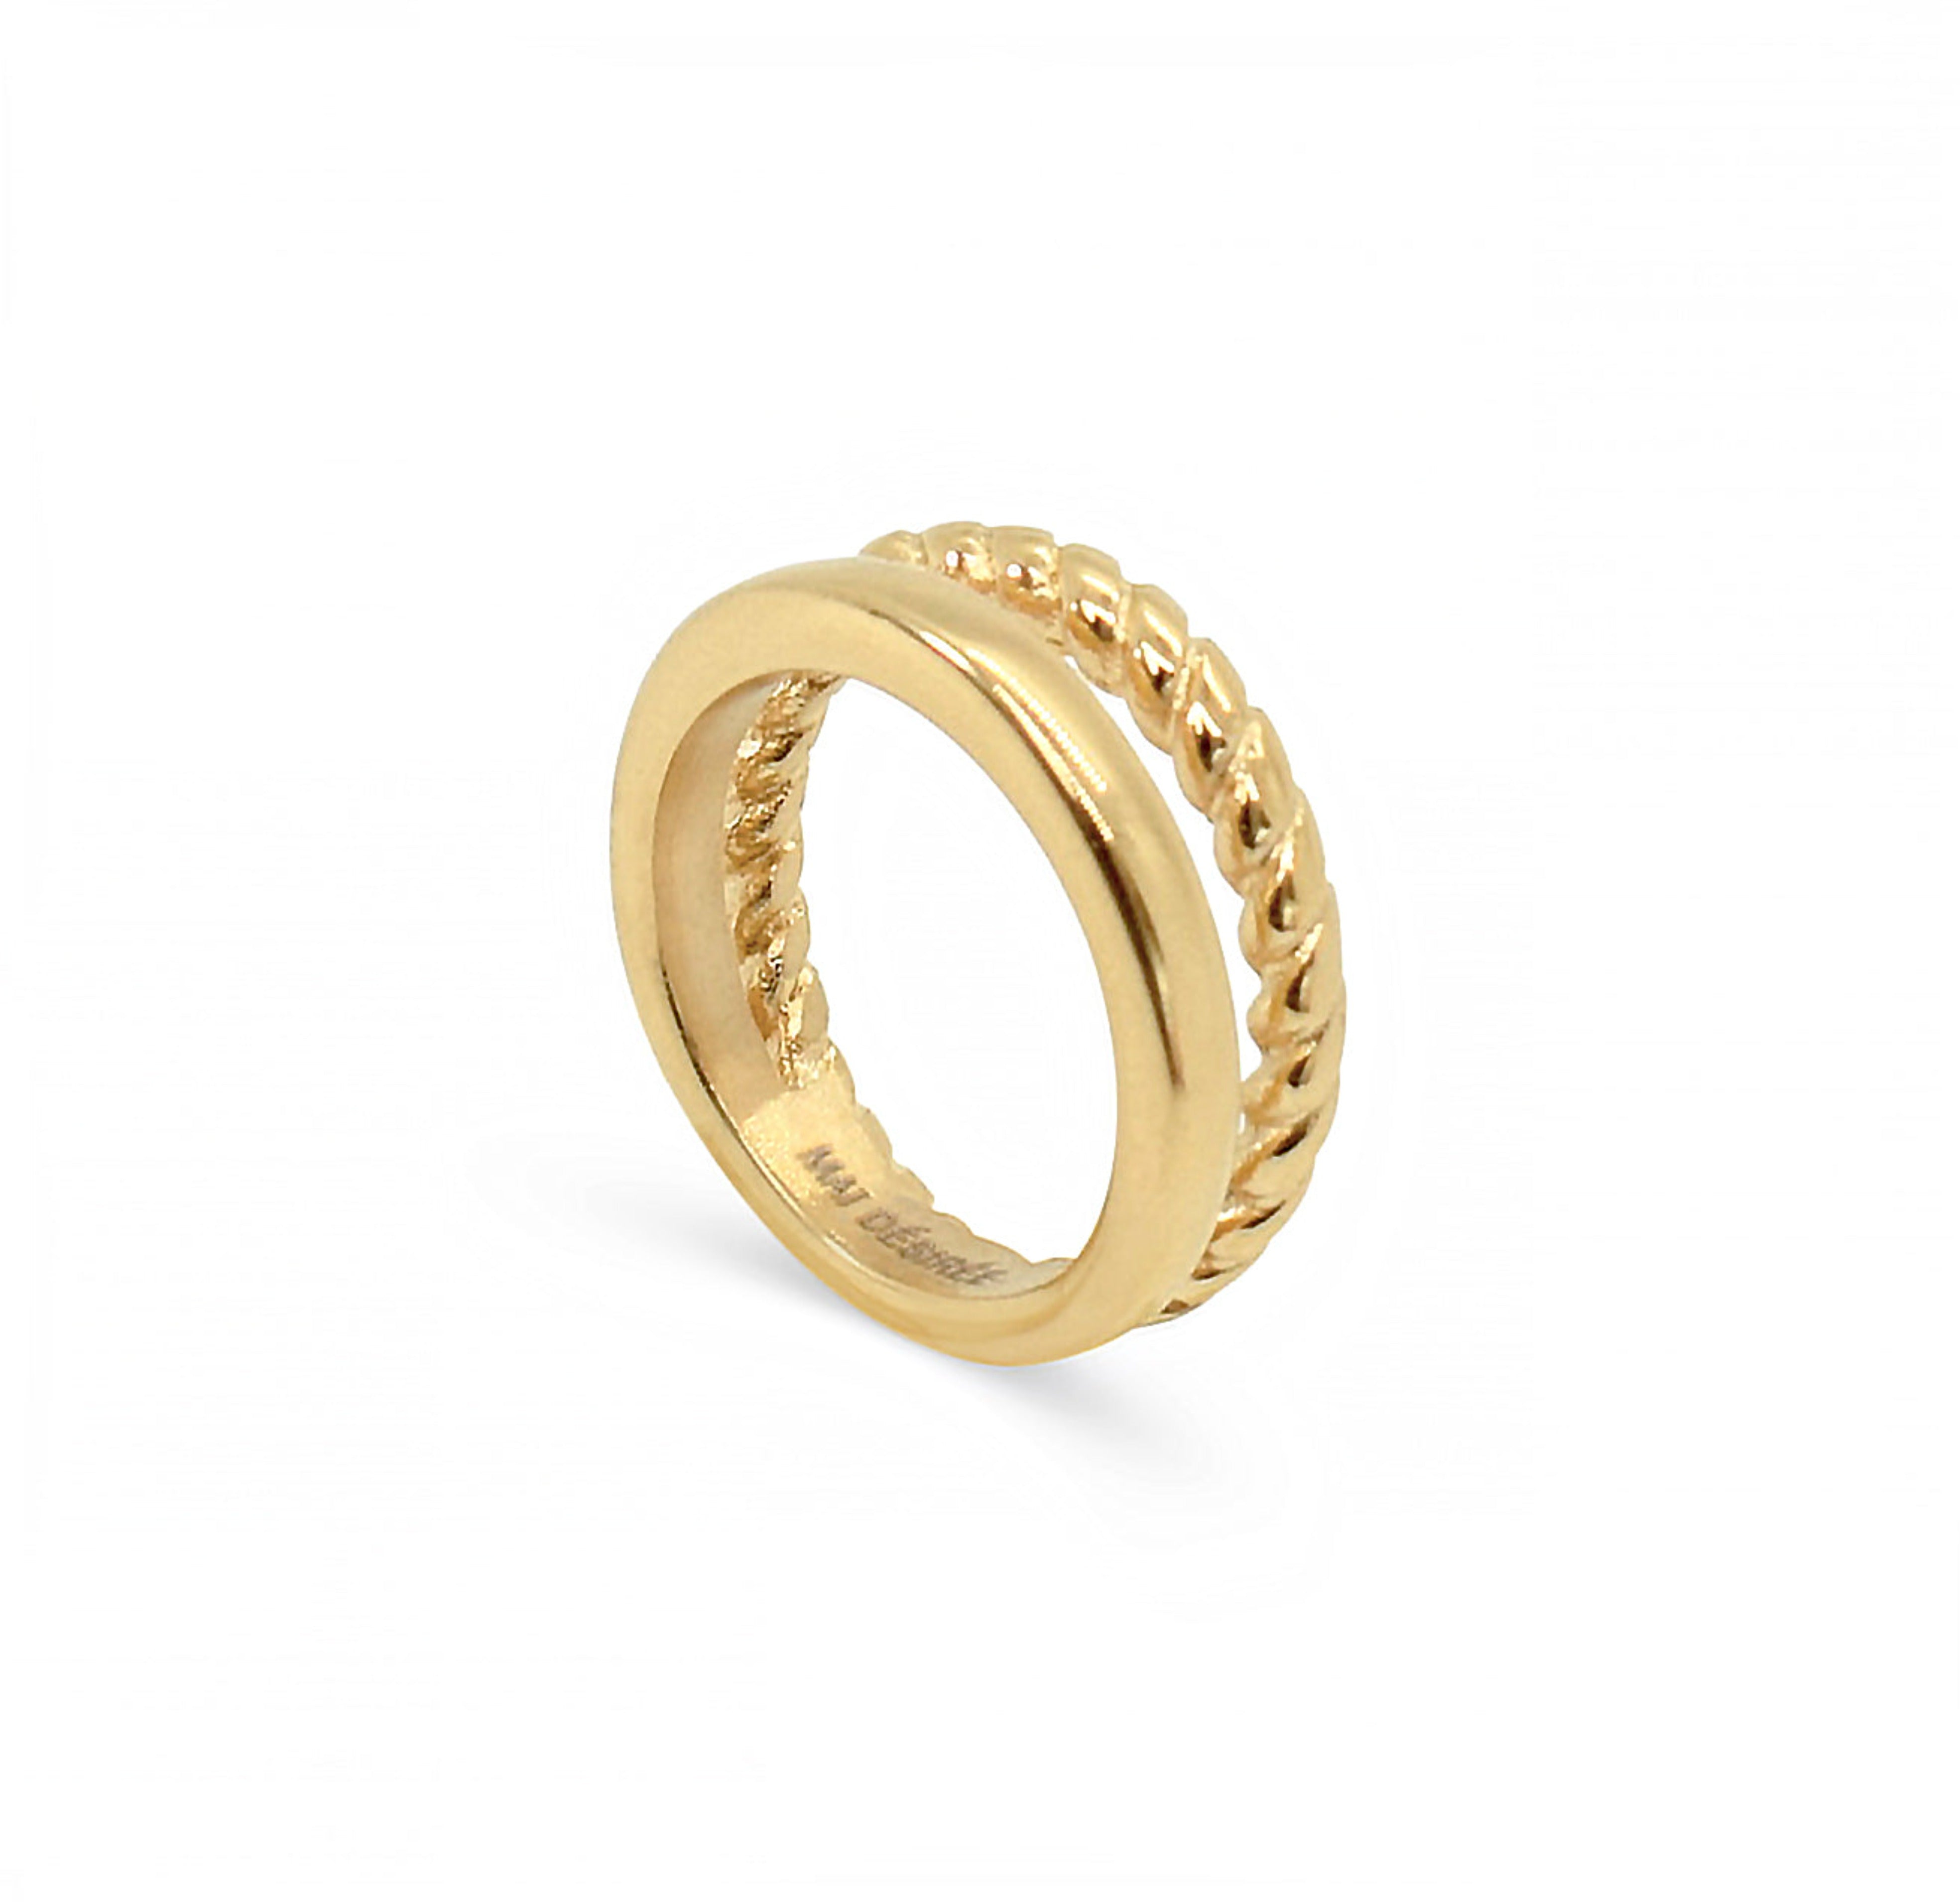 BIRDY GOLD DUO RING BAND RING - SAMPLE